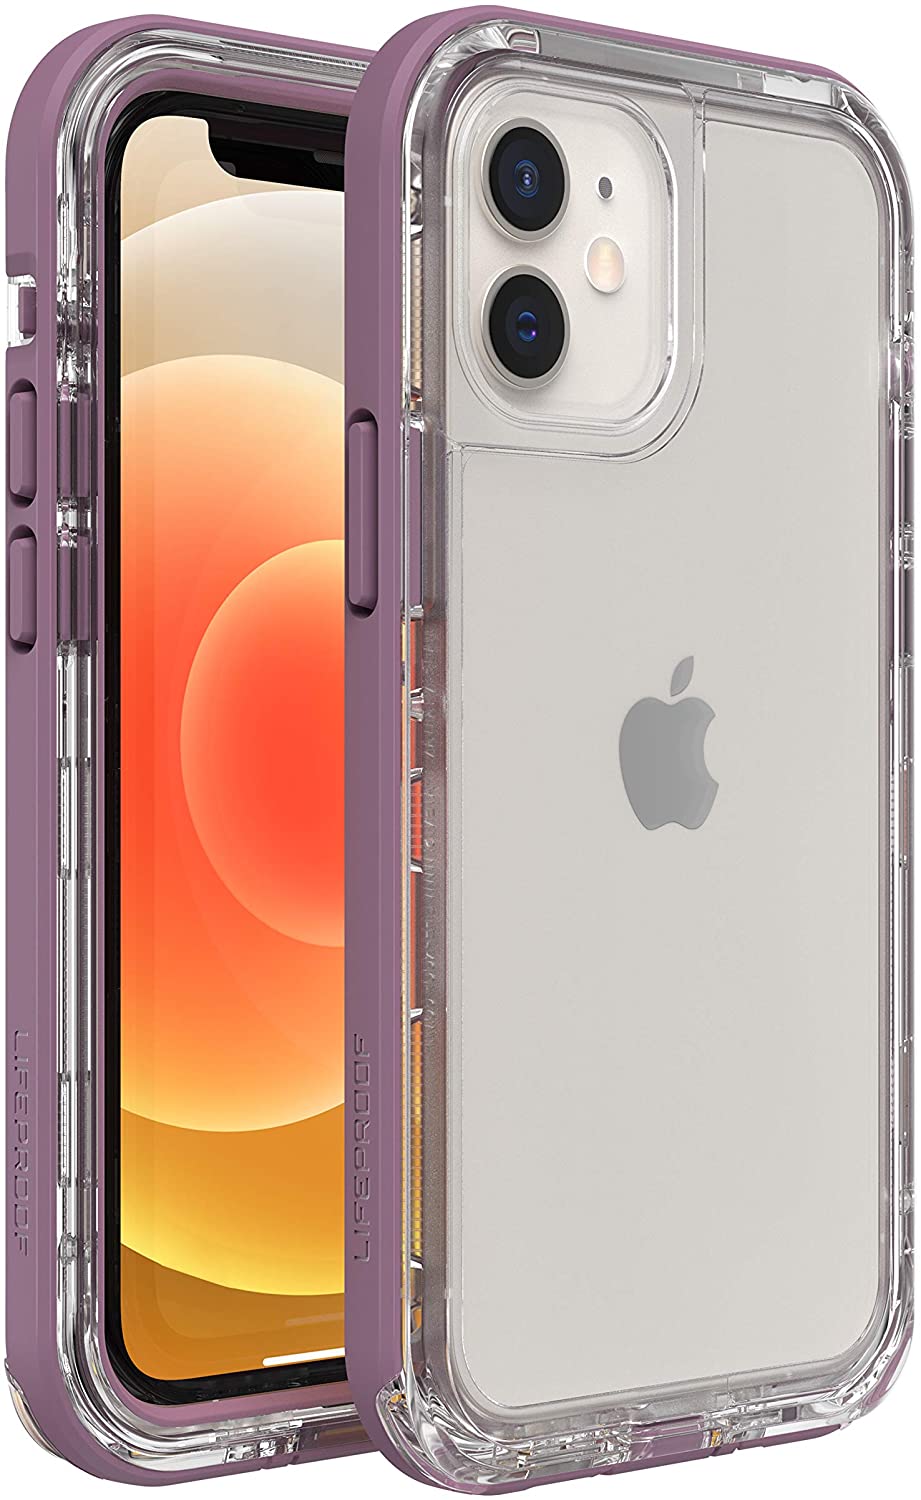 LifeProof NEXT SERIES Case for Apple iPhone 12 Mini - NAPA Clear / Lavender (Certified Refurbished)